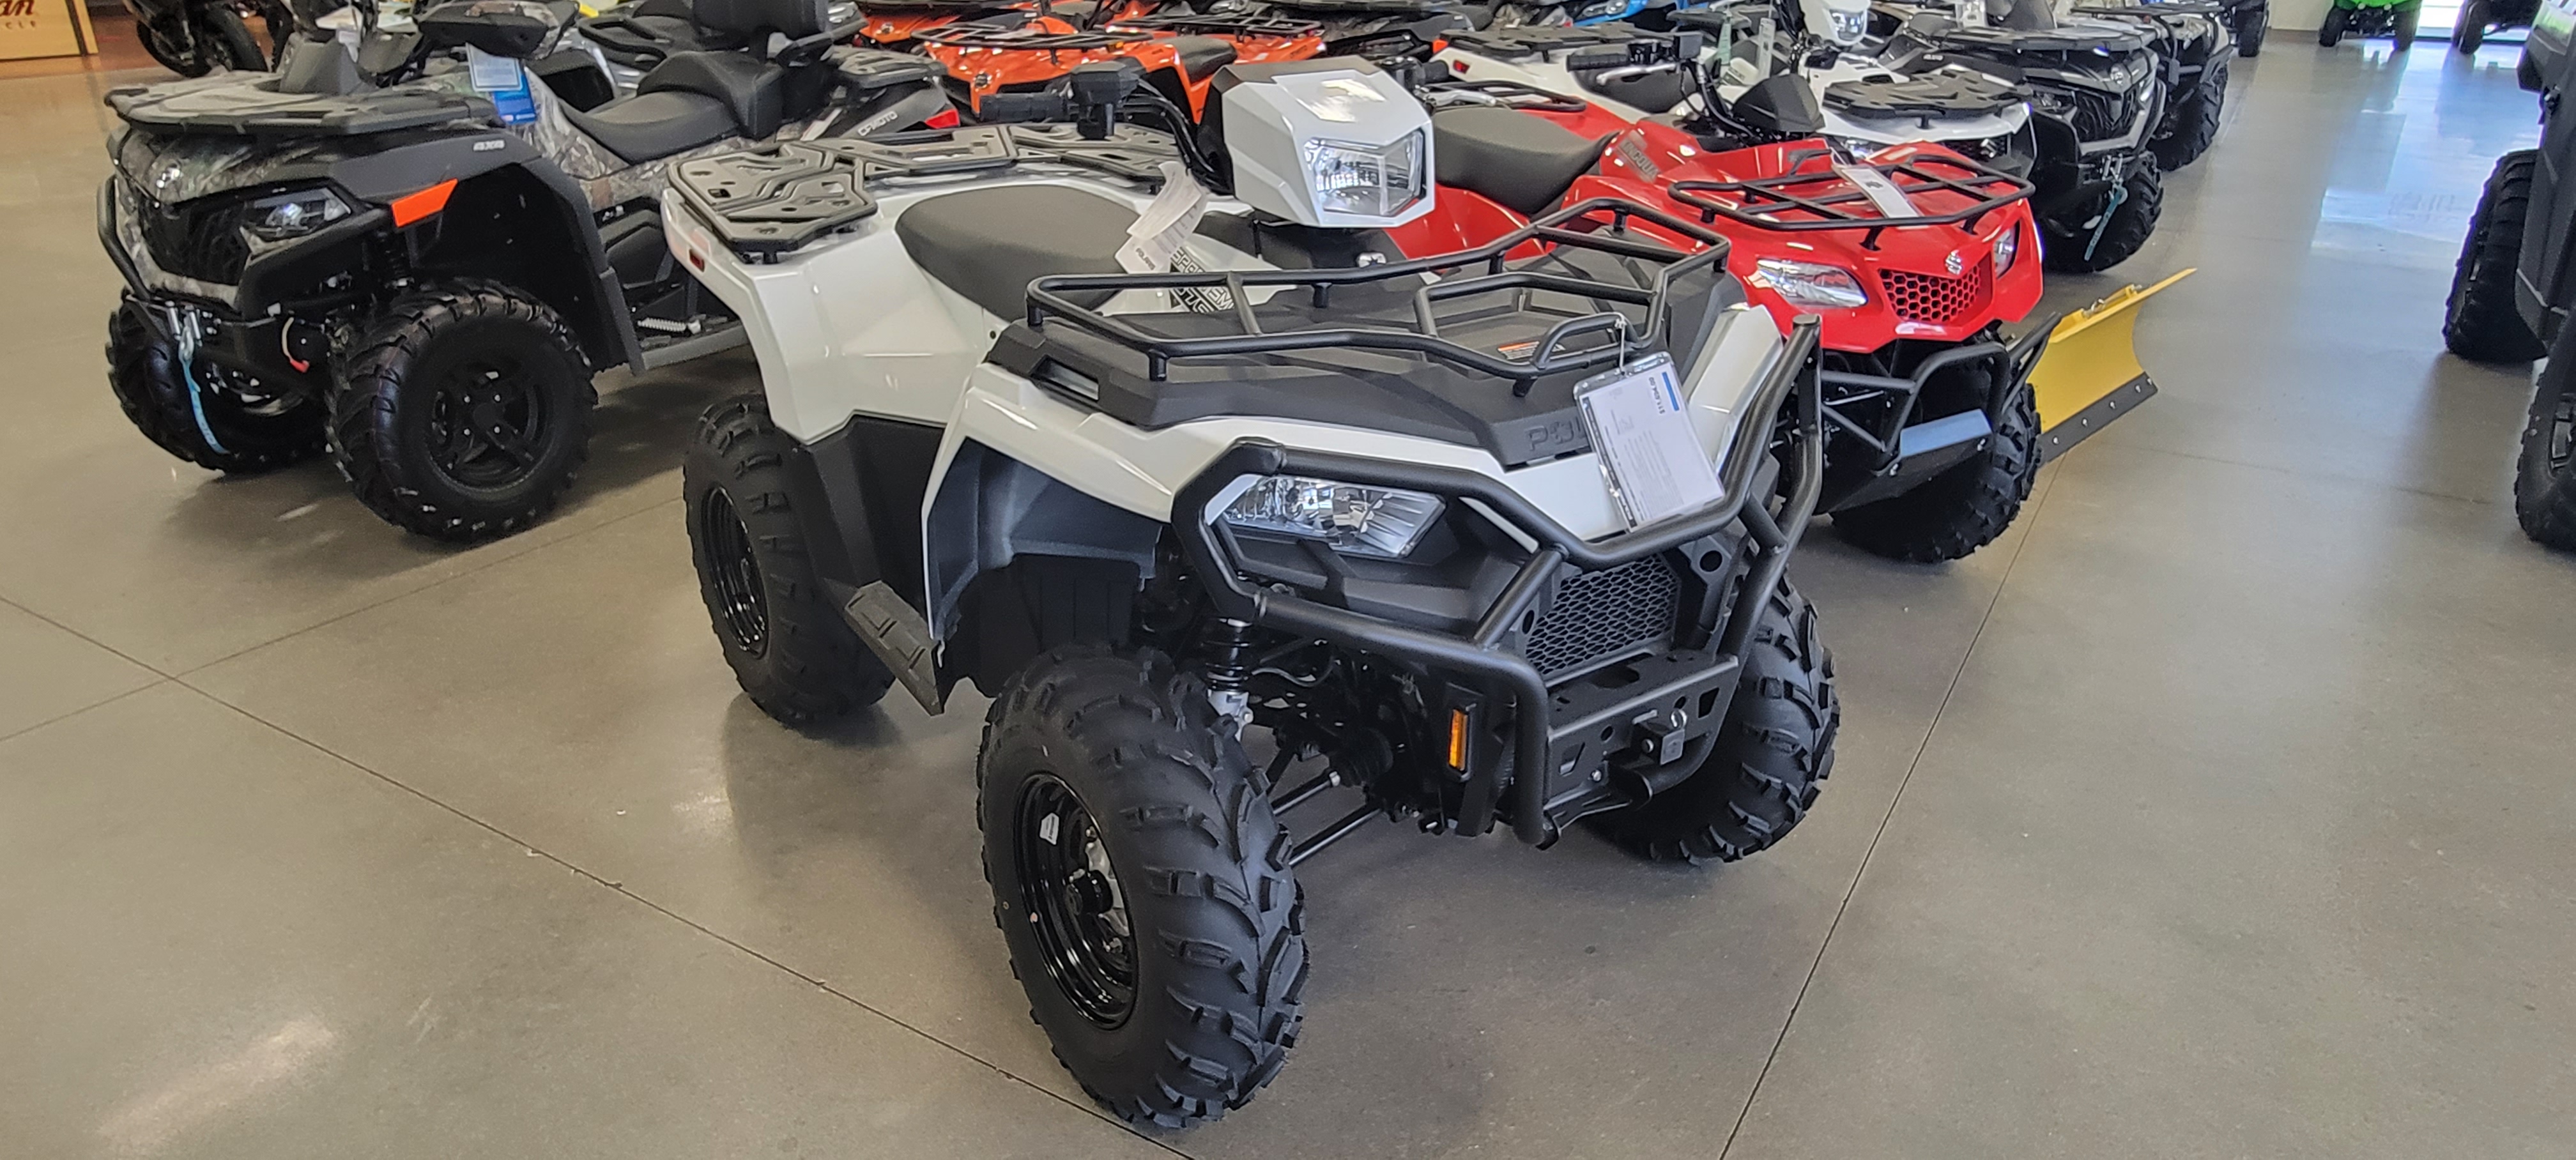 2022 Polaris Sportsman 570 Utility HD at Brenny's Motorcycle Clinic, Bettendorf, IA 52722